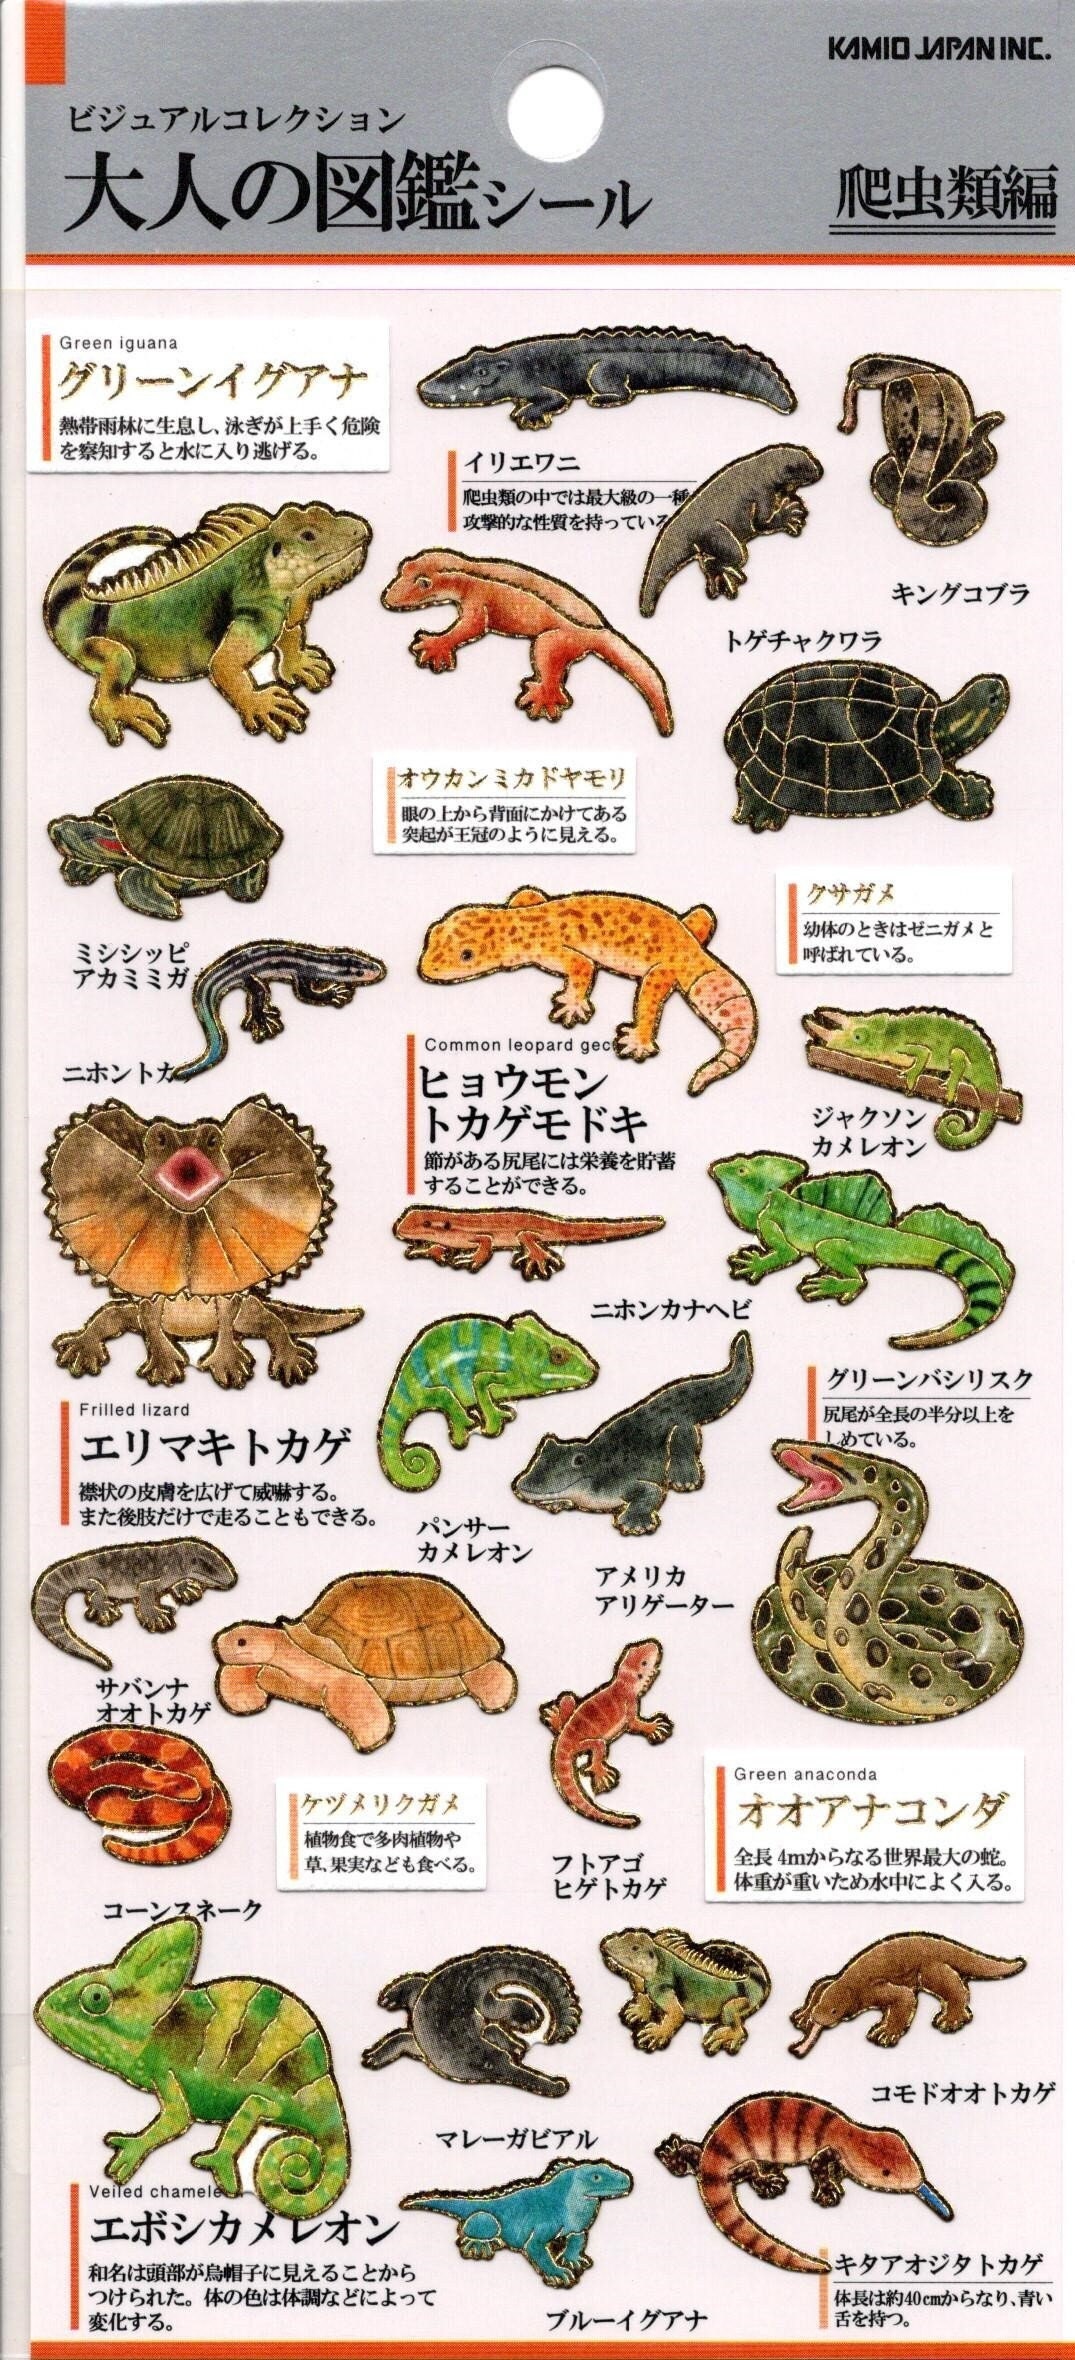 Types Of Lizards Chart